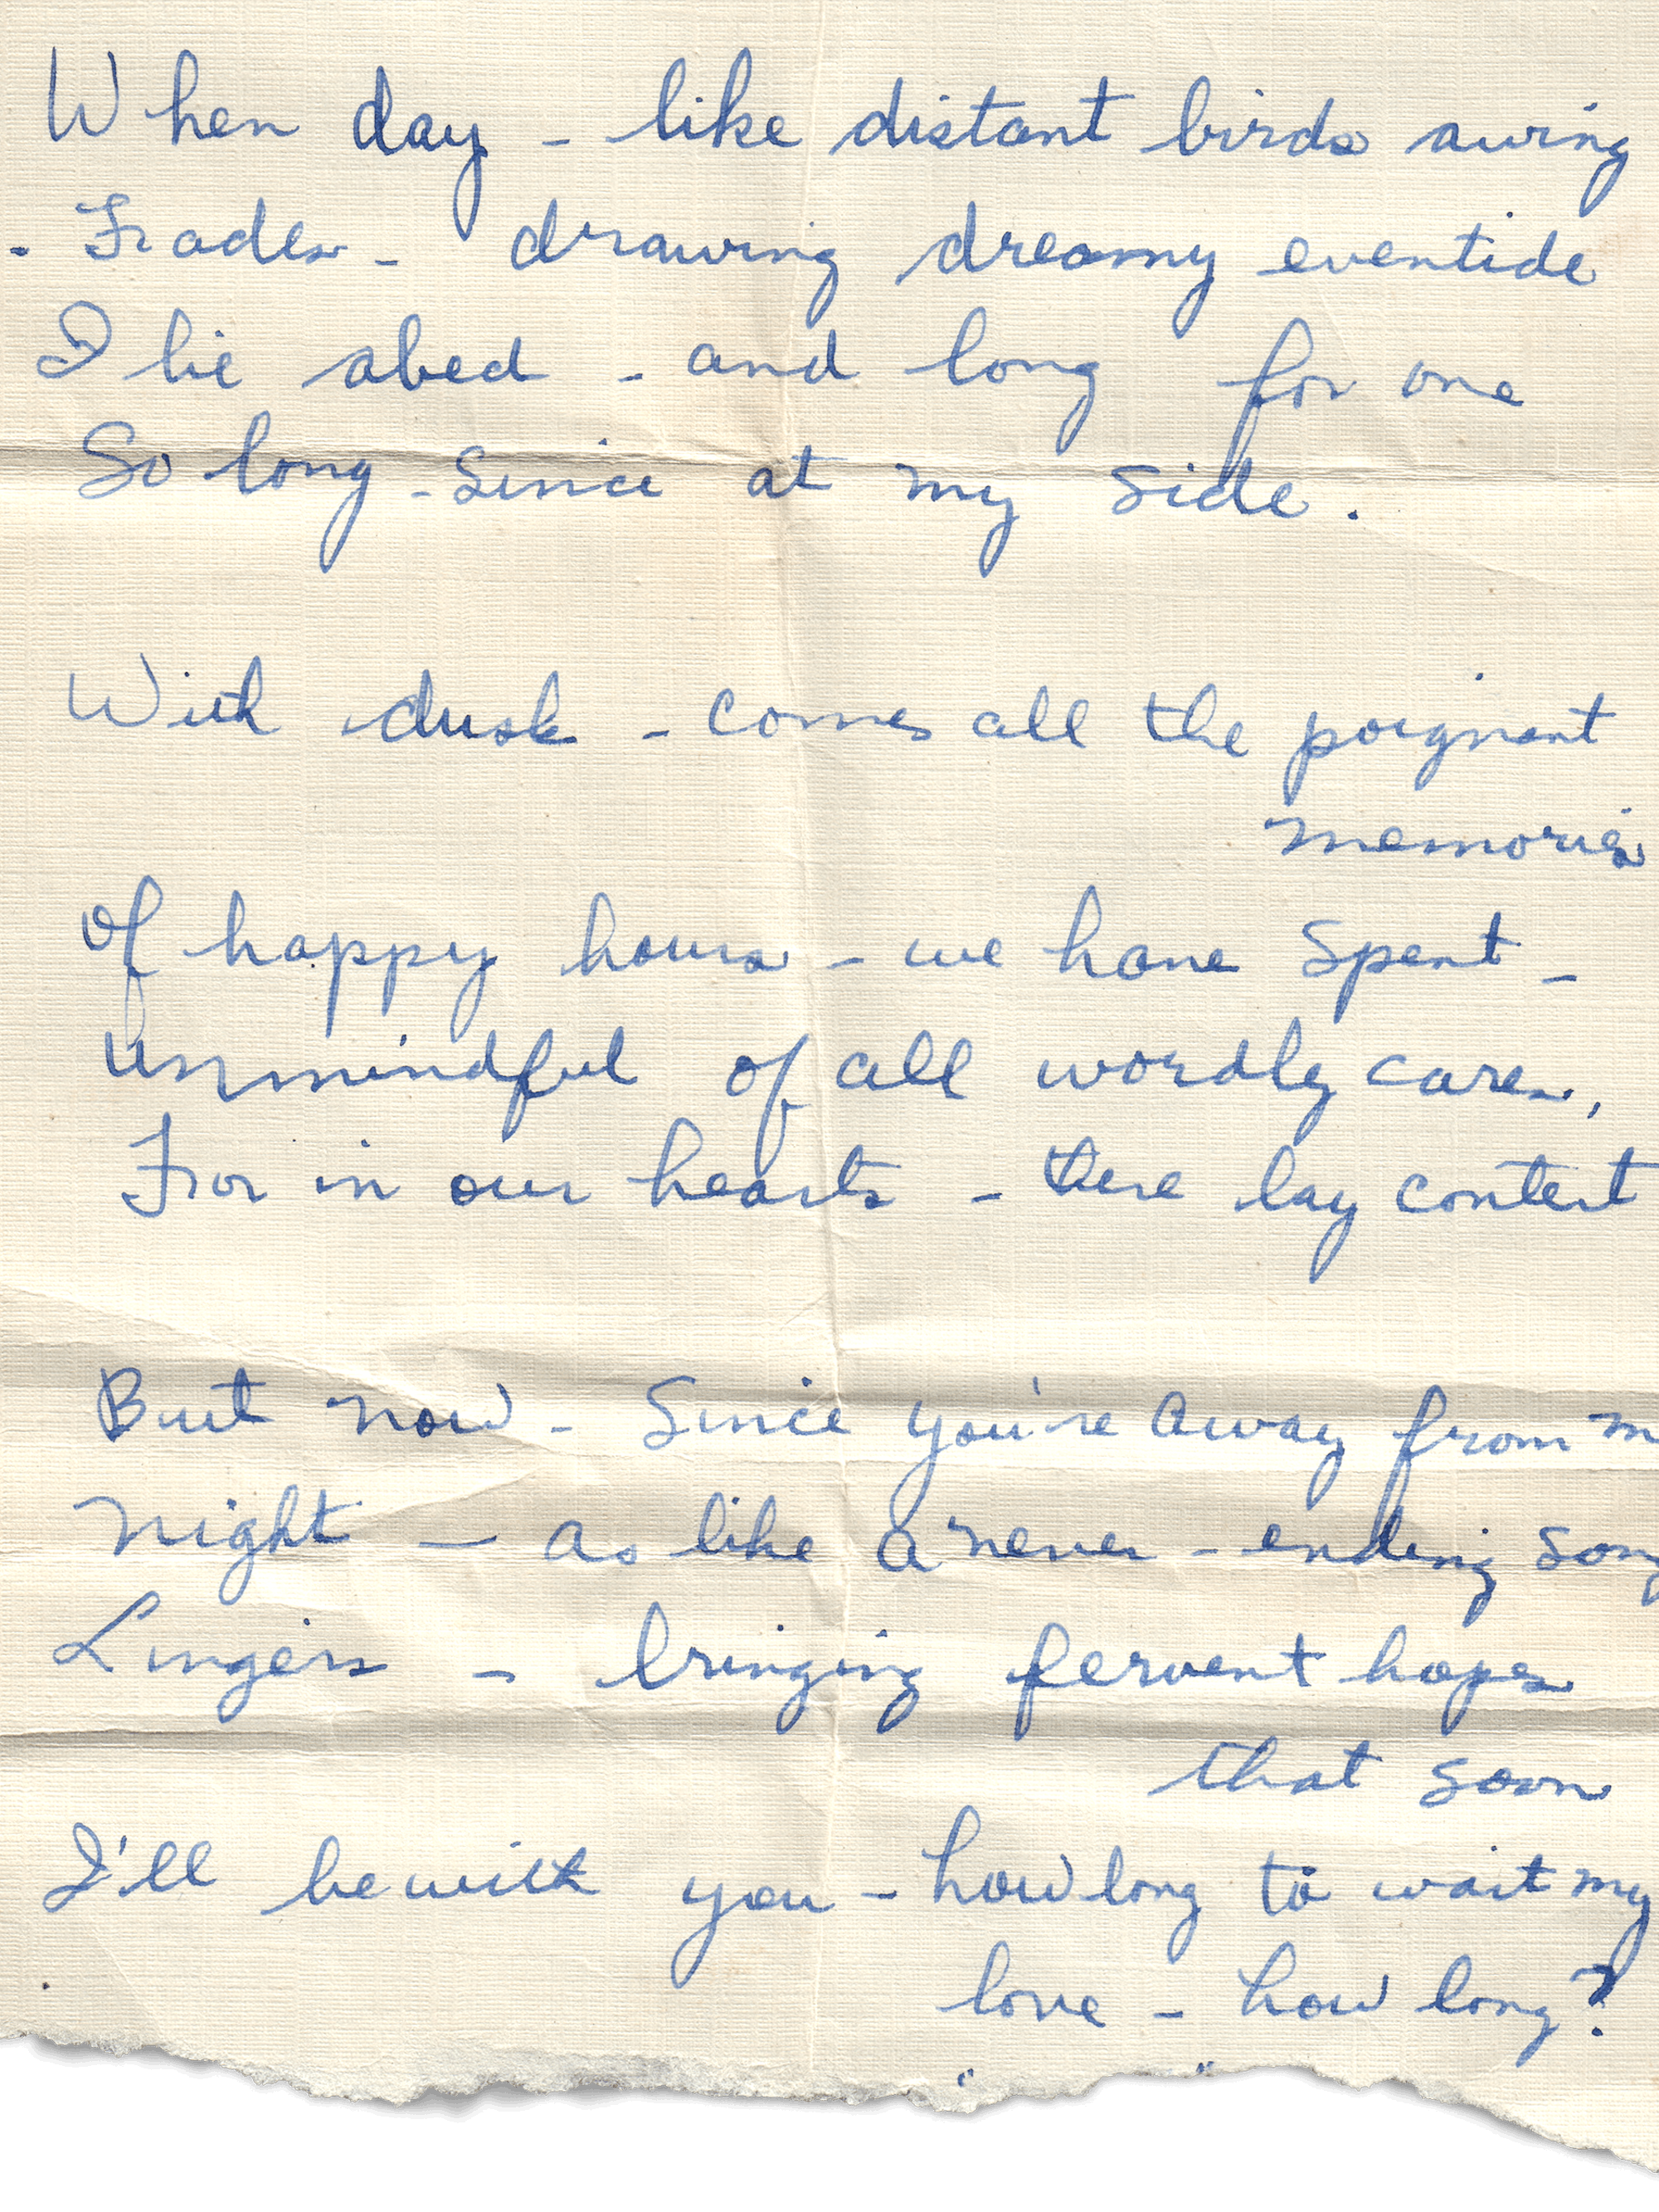 One of several letters from Henschel to Donahue.